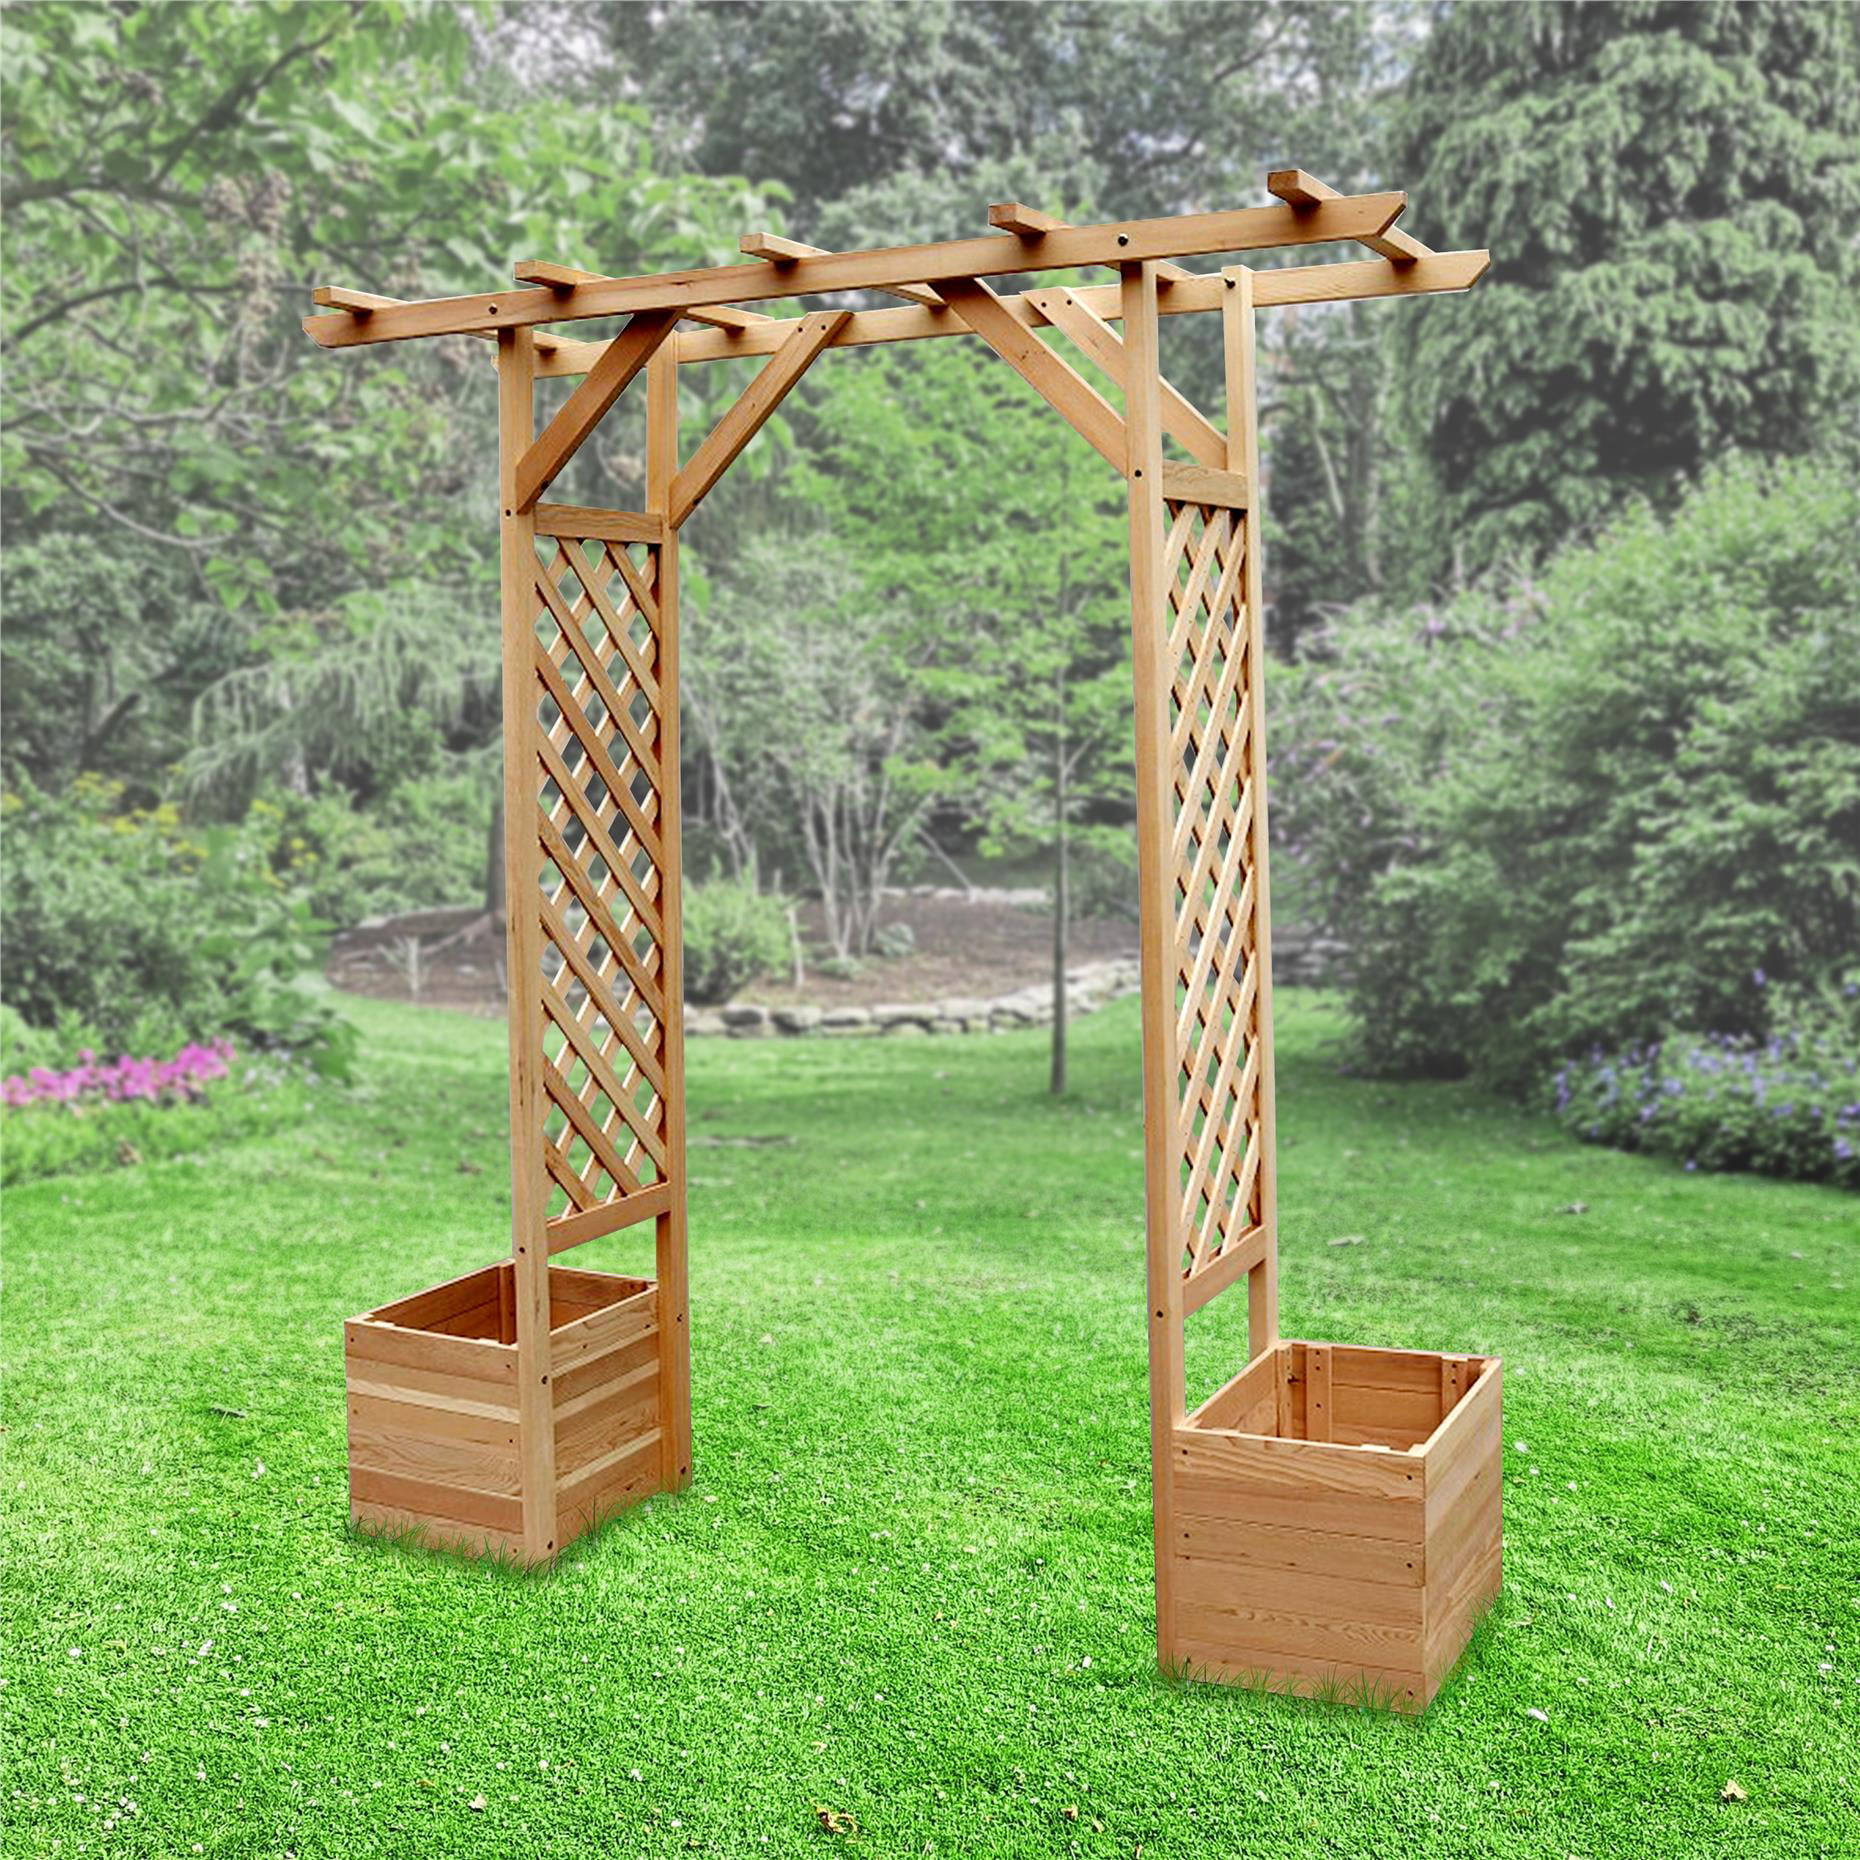 ALEKO WARCH03 Outdoor Wooden Garden Arbor with Planter Boxes and ...